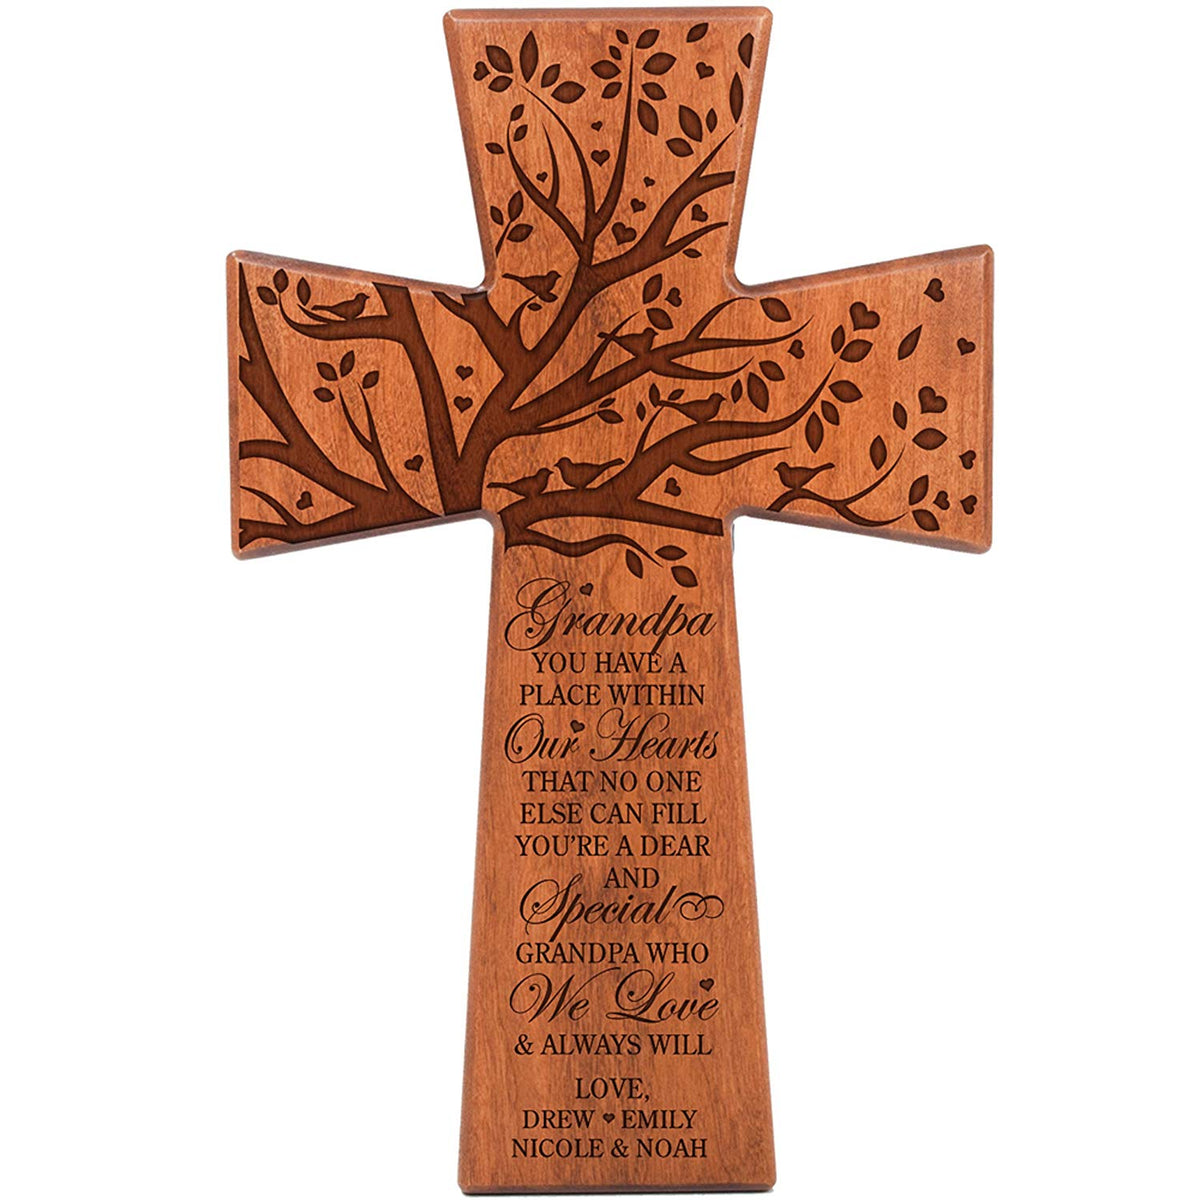 Personalized Wood Wall Cross Birthday Gift For Grandpa - Place Within Our Hearts - LifeSong Milestones